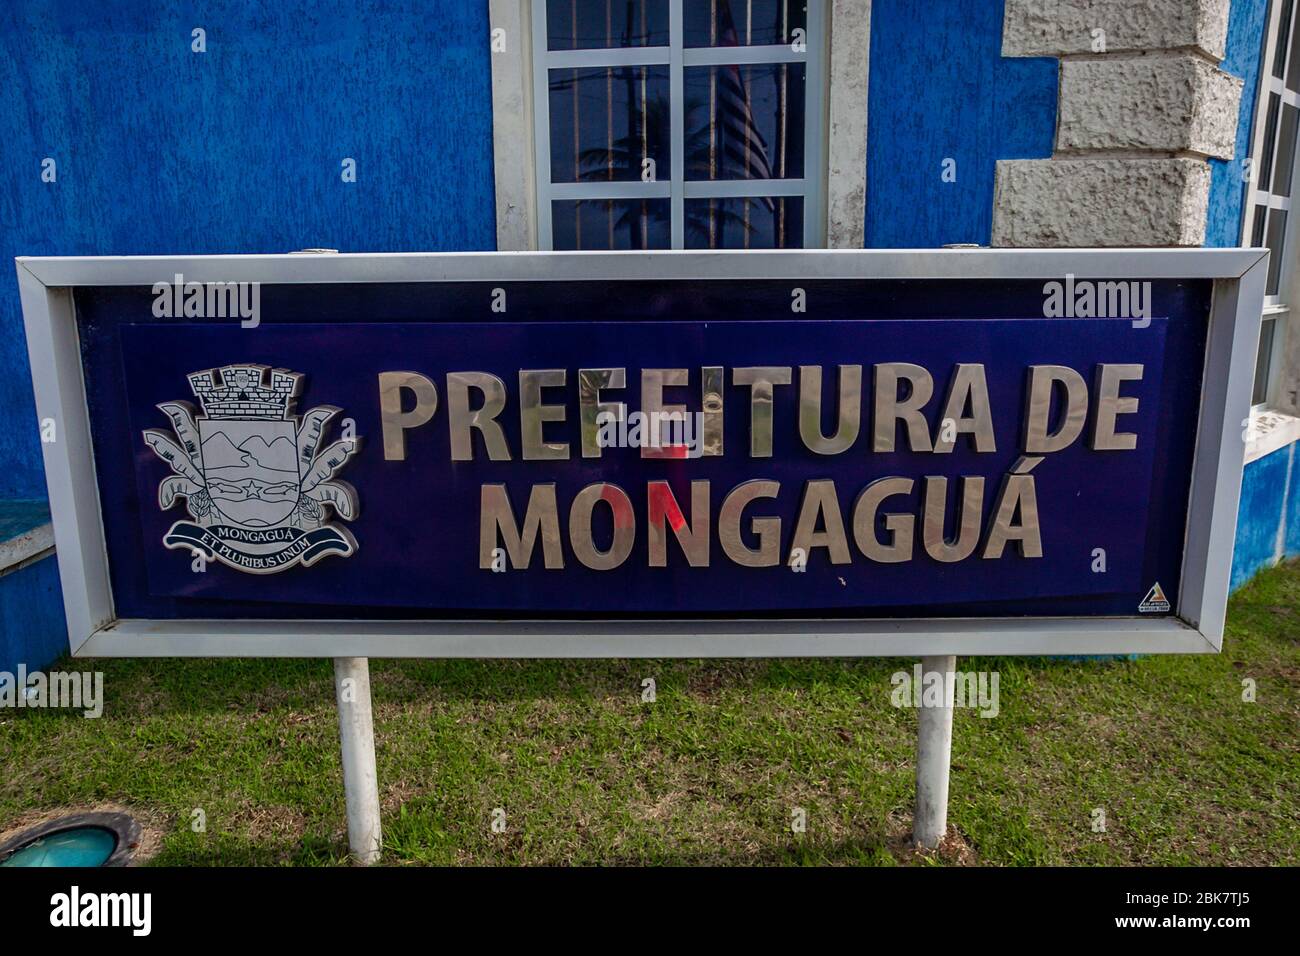 MONGAGUÁ, SP - 02.05.2020: CARTAZ DE COMBATE AO COVID 19 EM MONGAGUÁ - Mongaguá City Hall places a sign in front of the building to raise awareness of the quarantine population. The beaches of the coast of the state of São Paulo remain closed to bather during the extended holiday of the work day. The action aims to prevent contamination by the new coronavirus (Covid-19). (Photo: Antonio Molina/Fotoarena) Stock Photo